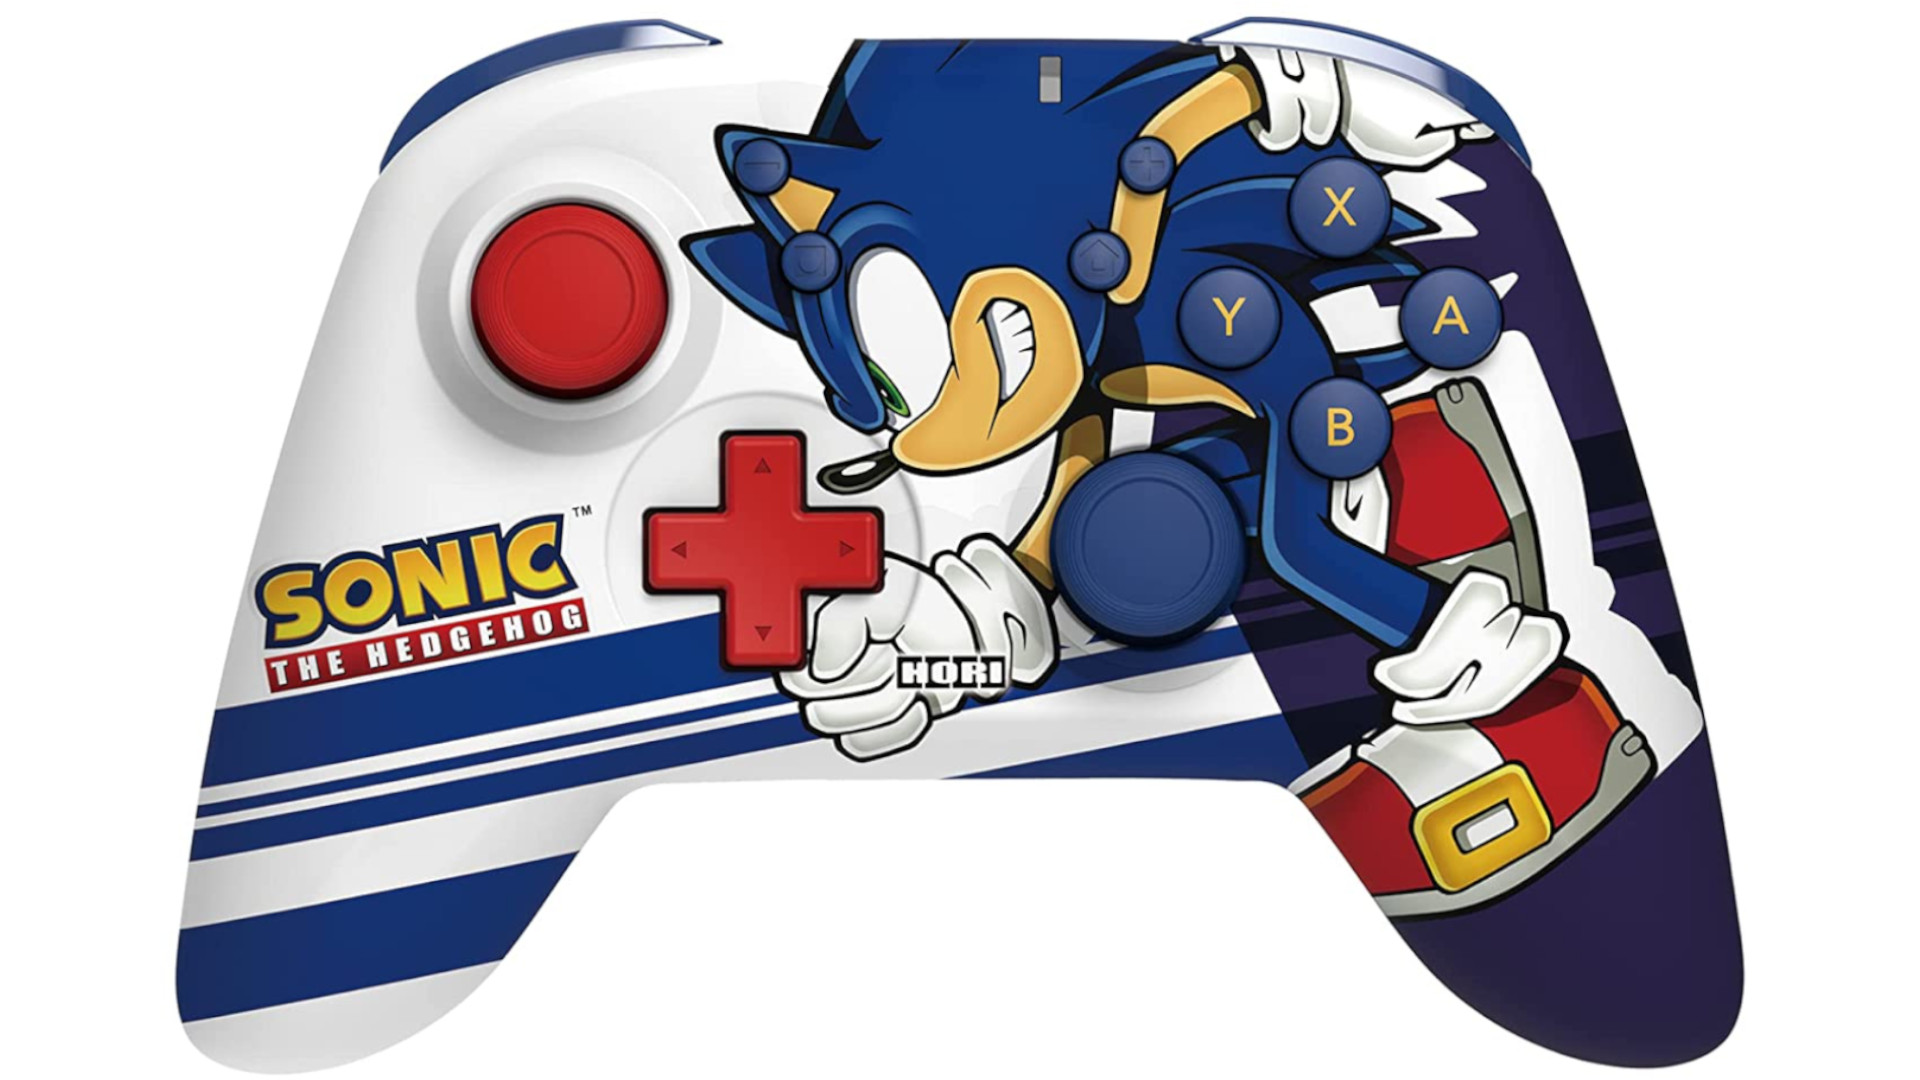 The front of the Sonic Nintendo Switch Pro Controller